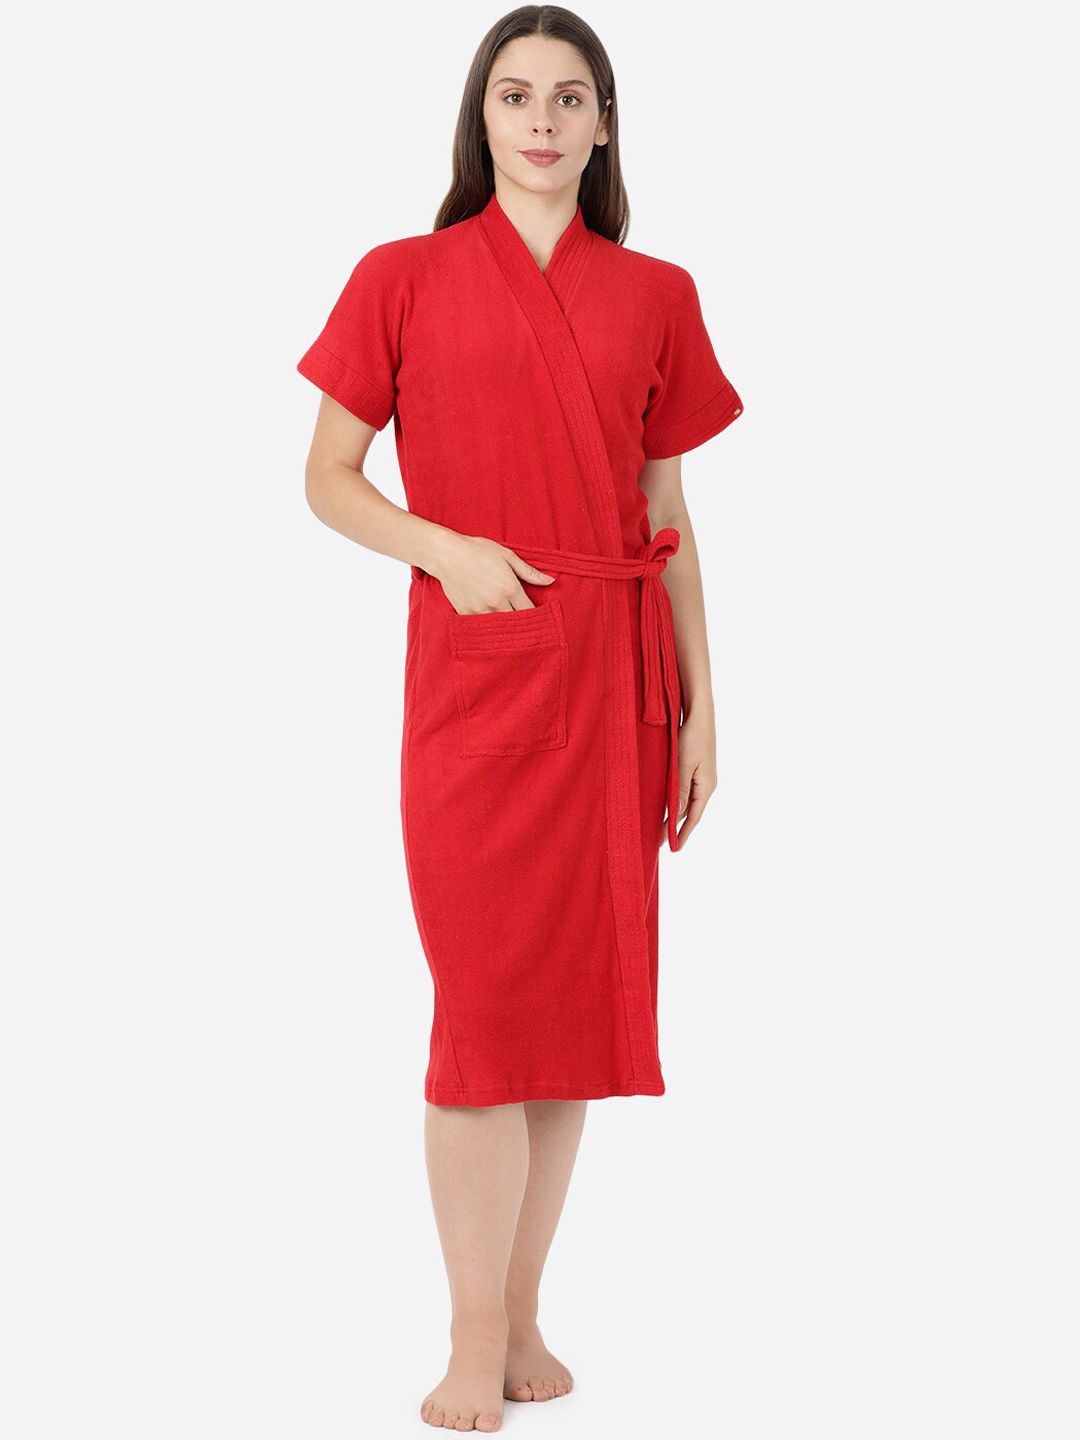 GOLDSTROMS Women Red Solid Cotton Bath Robe Price in India